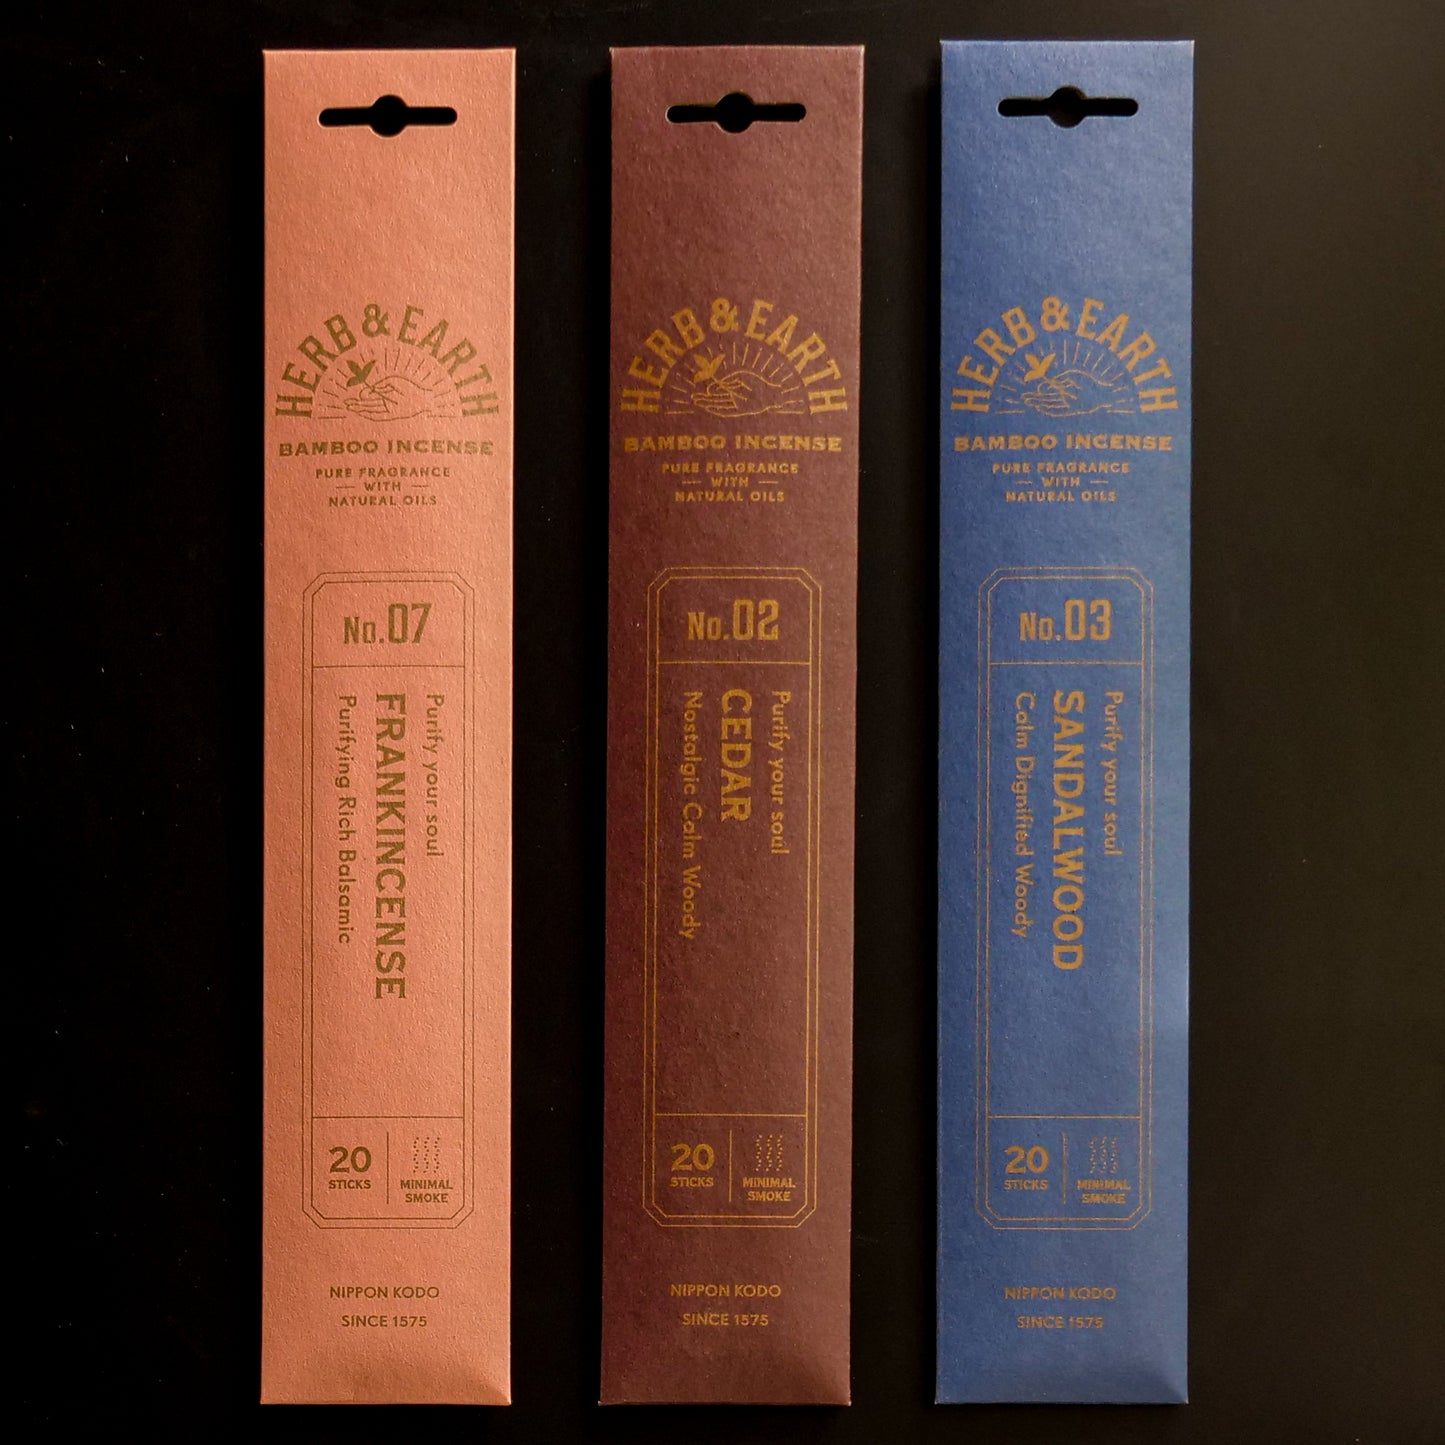 Herb & Earth Bamboo Incense Sticks